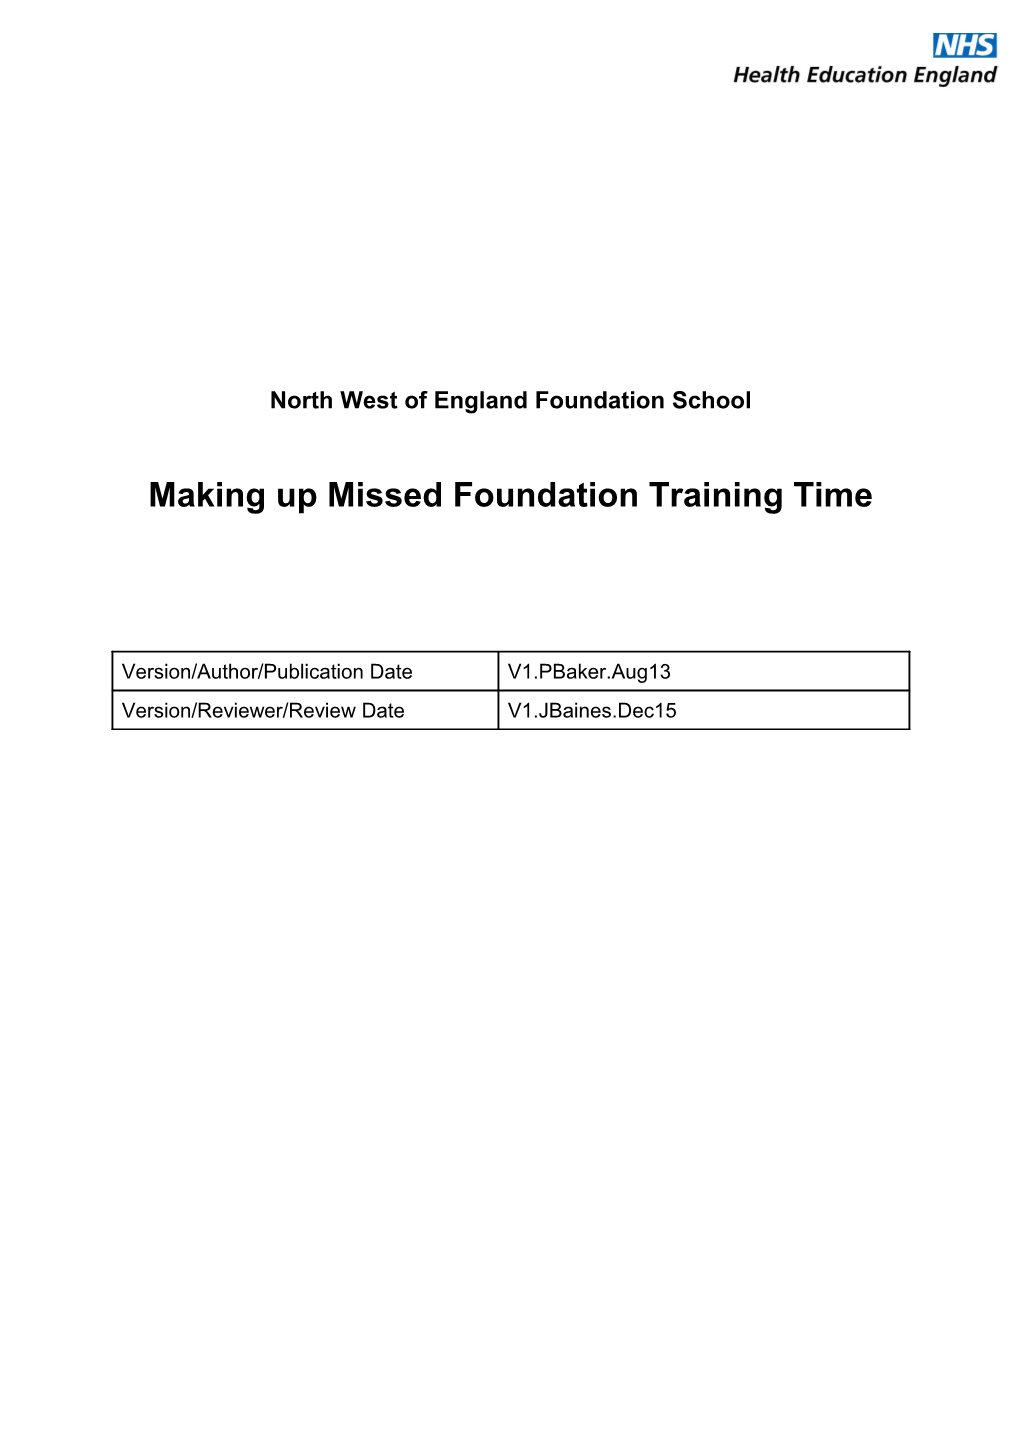 Policy on Making up Missed Foundation Training Time